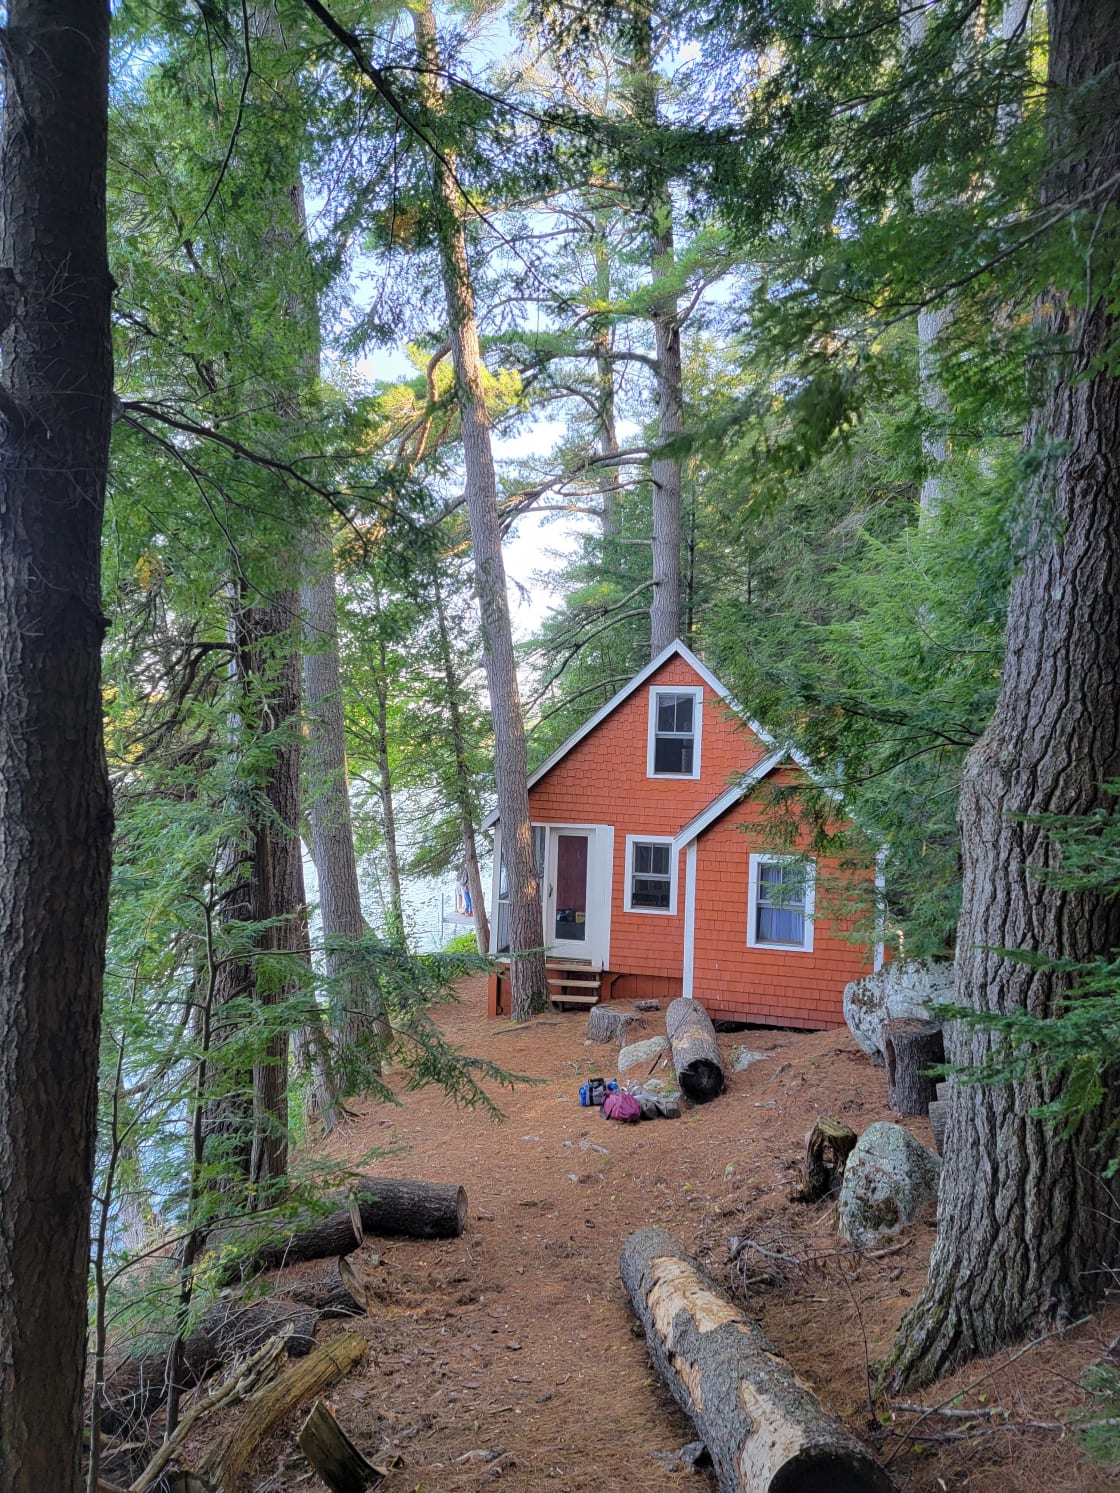 Cabin 1 is nestled near the stream beneath towering pine trees